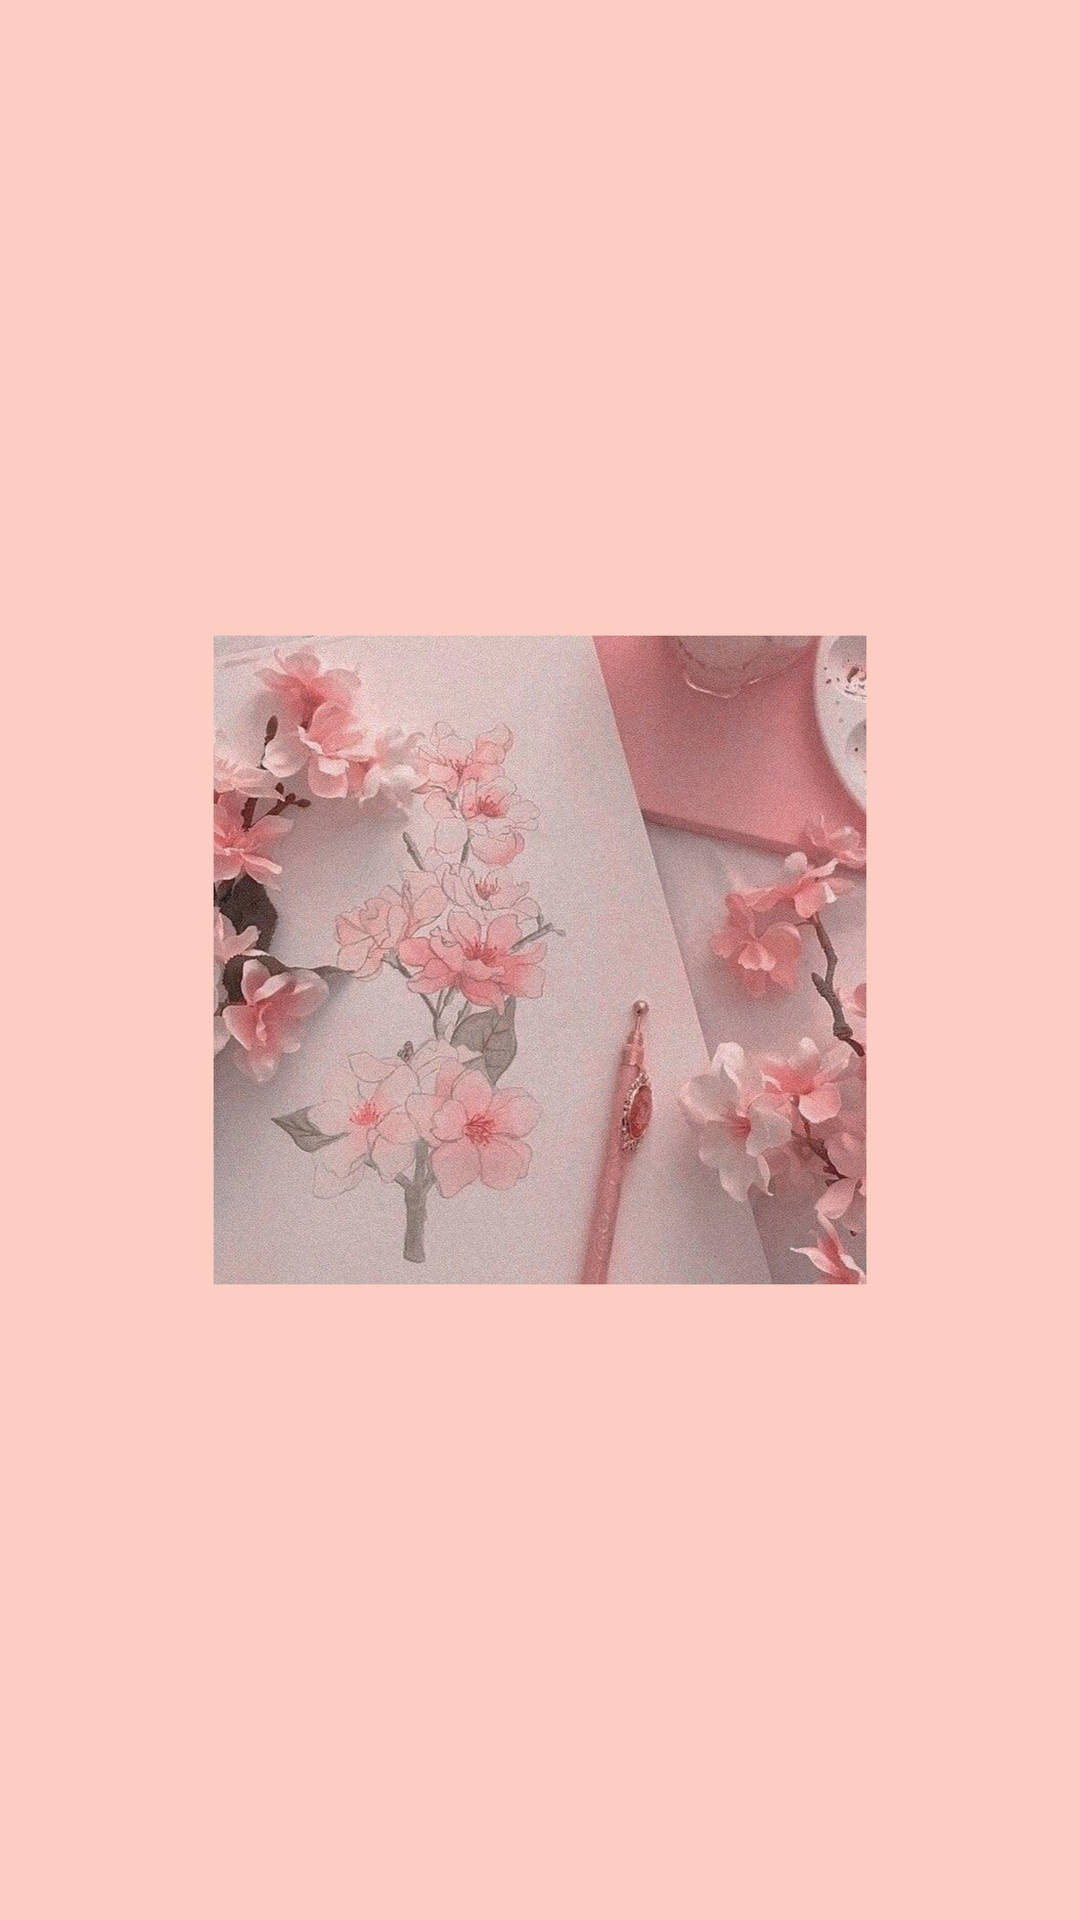 Pink Aesthetic Iphone Wallpapers